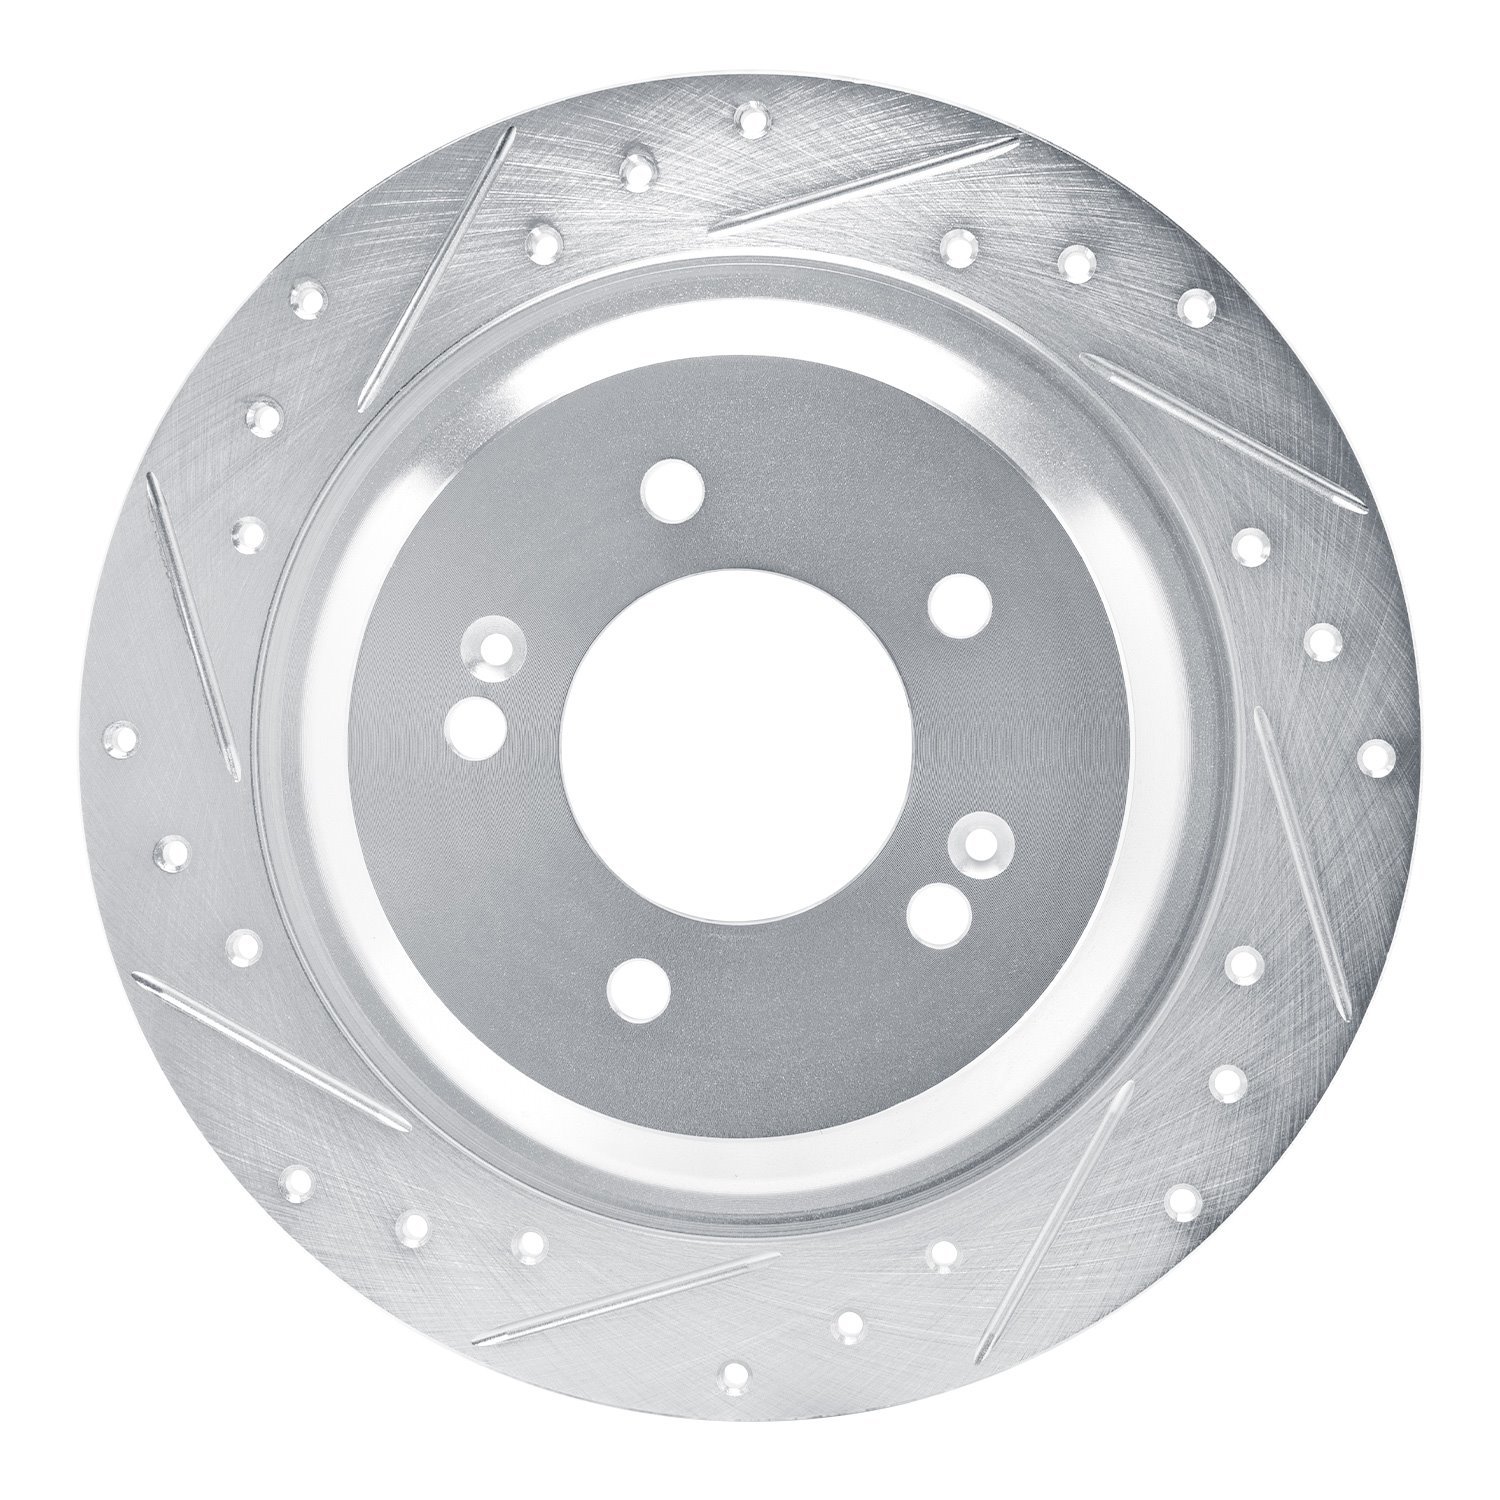 631-03068L Drilled/Slotted Brake Rotor [Silver], Fits Select Kia/Hyundai/Genesis, Position: Rear Left